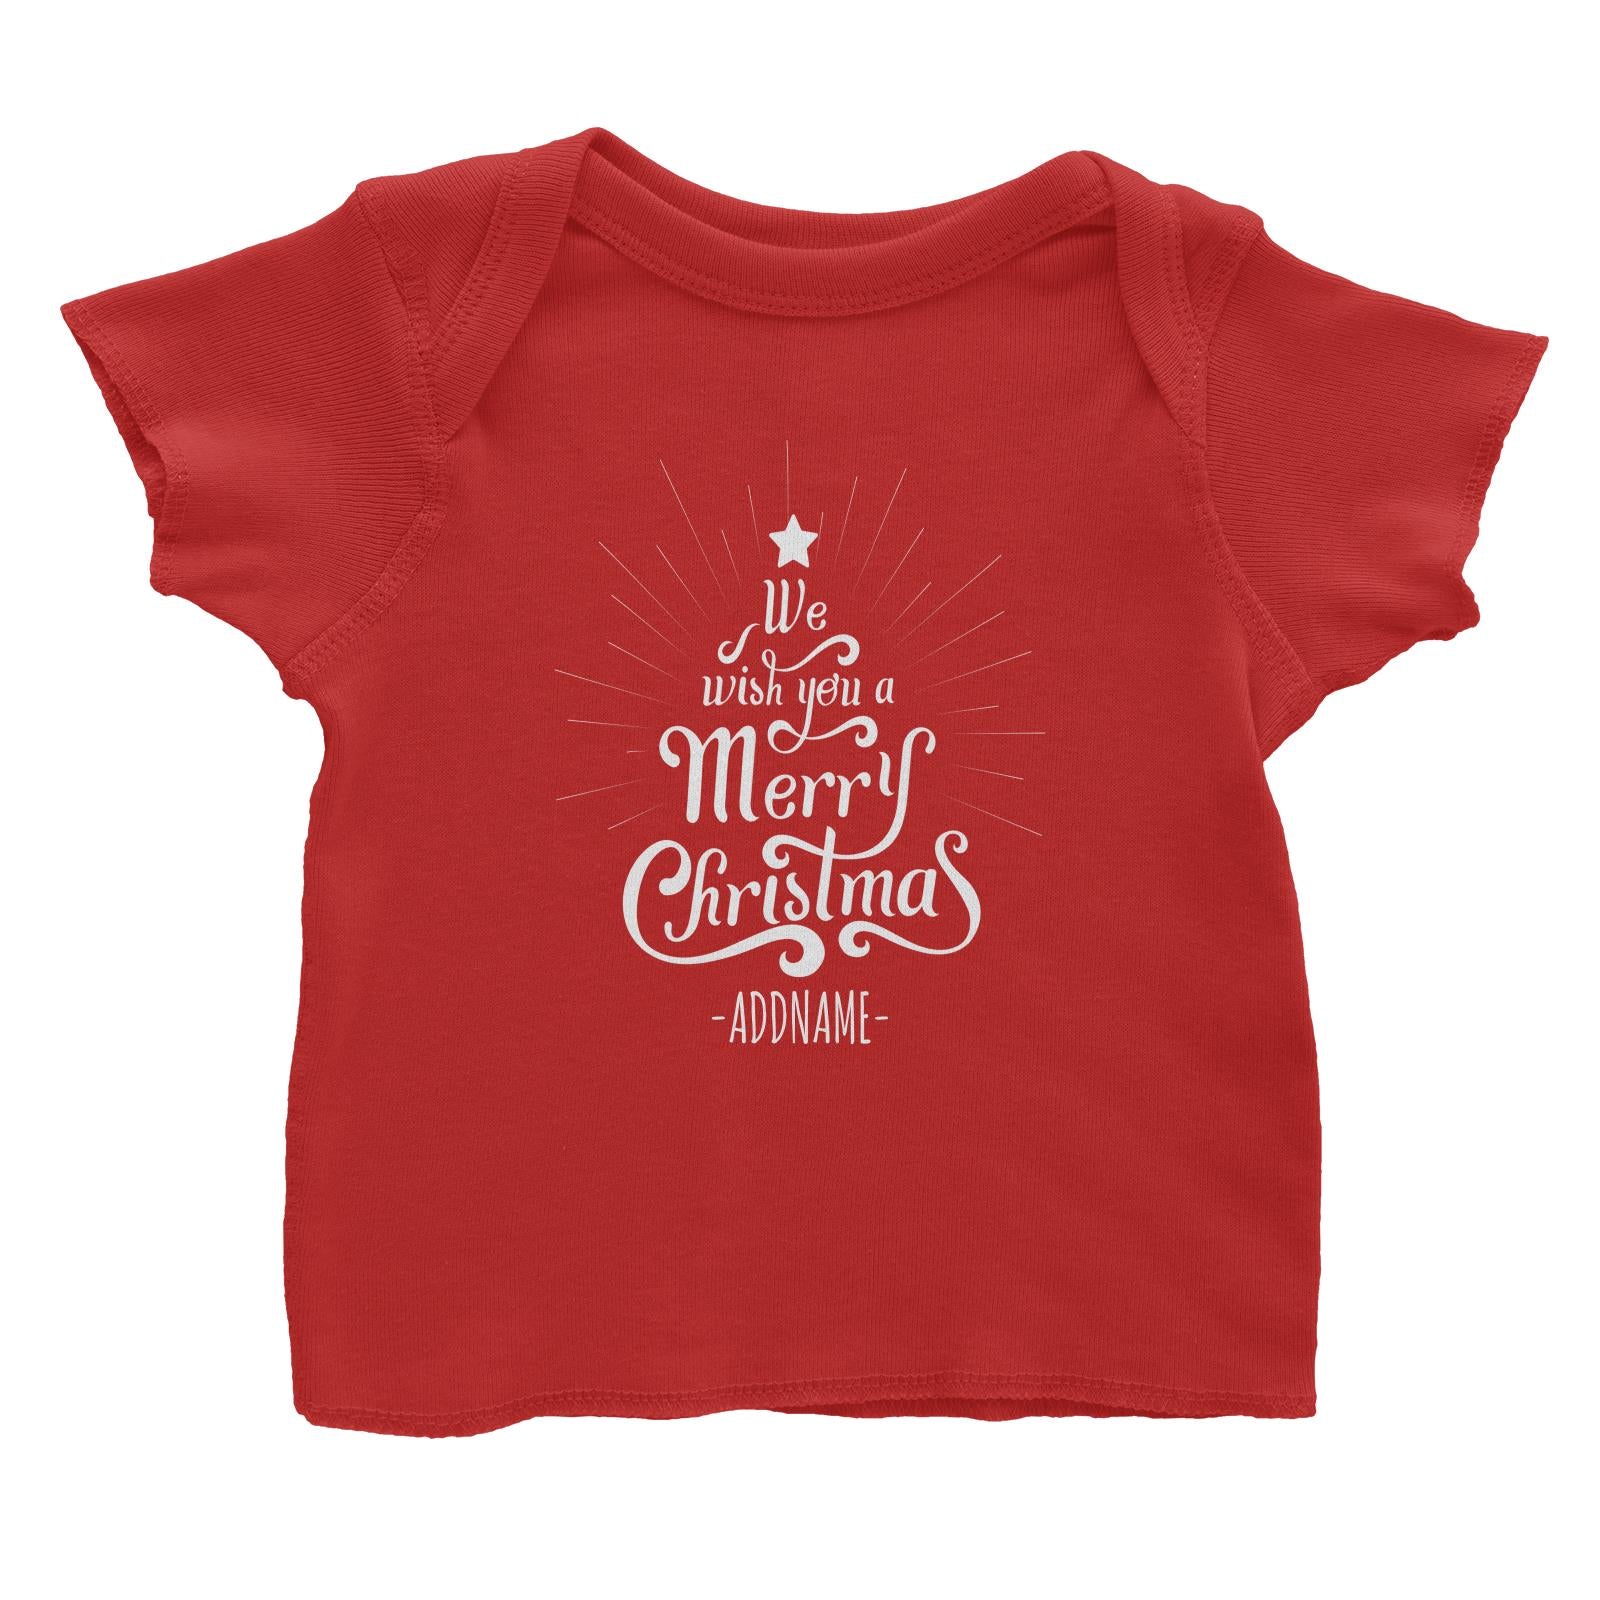 We Wish You A Merry Christmas Greeting Addname Baby T-Shirt  Personalizable Designs Lettering Matching Family